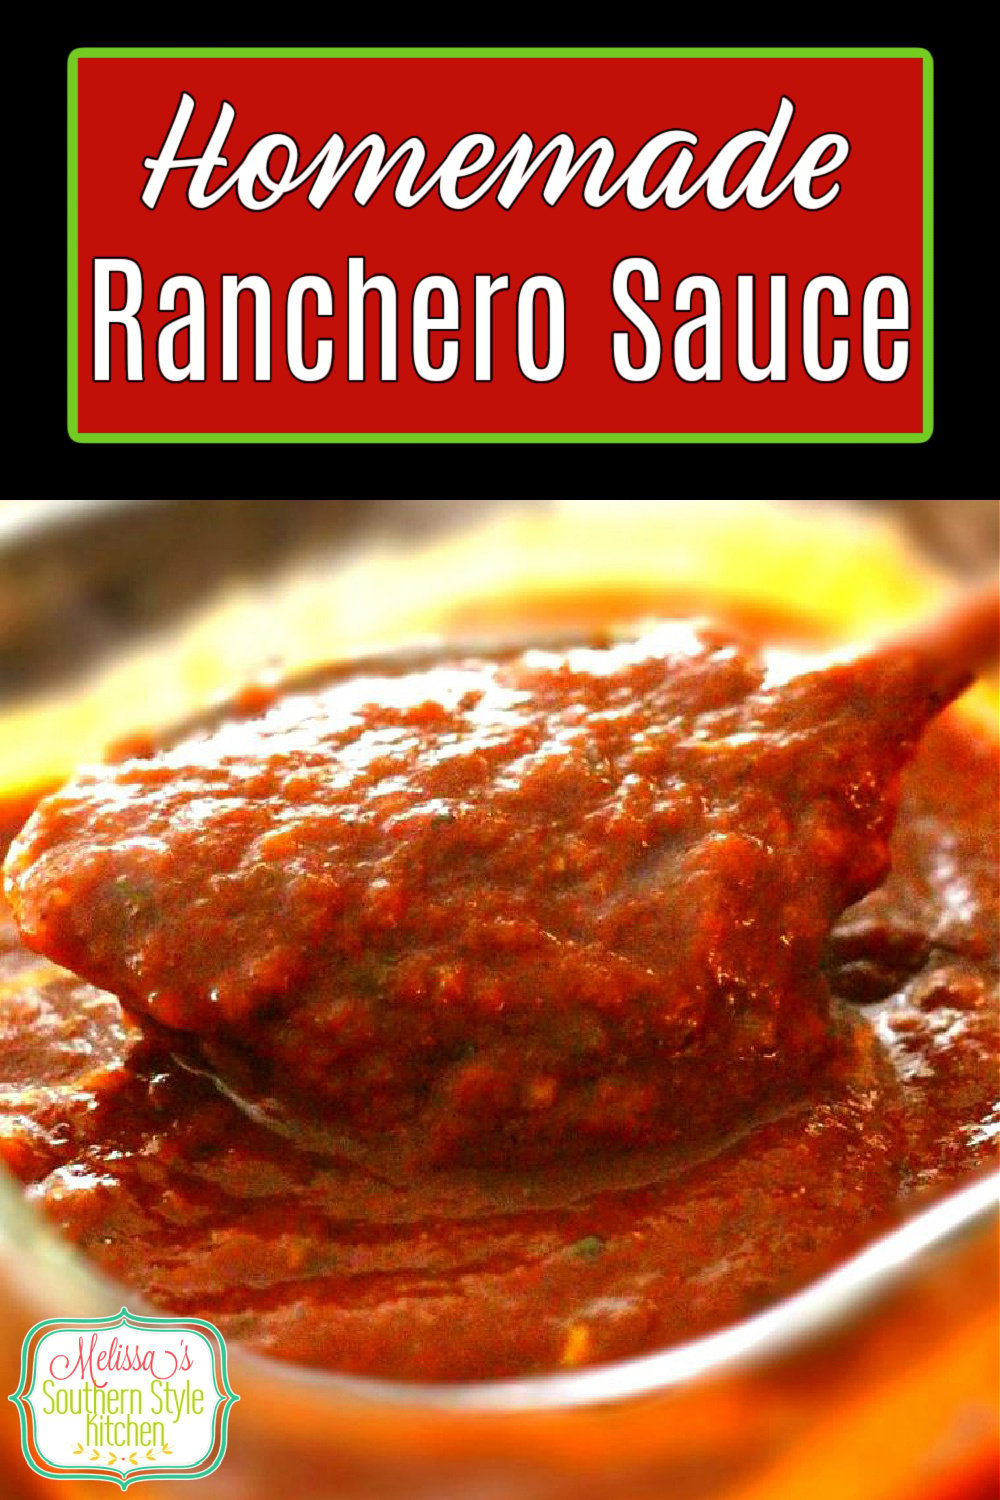 Enjoy this Homemade Ranchero Sauce recipe with any of your Mexican food favorites #rancherosauce #mexicanfood #mexicanrecipes #tacosacue #homemaderancherosauce #guajillopeppers #molesauce #chilisauce via @melissasssk